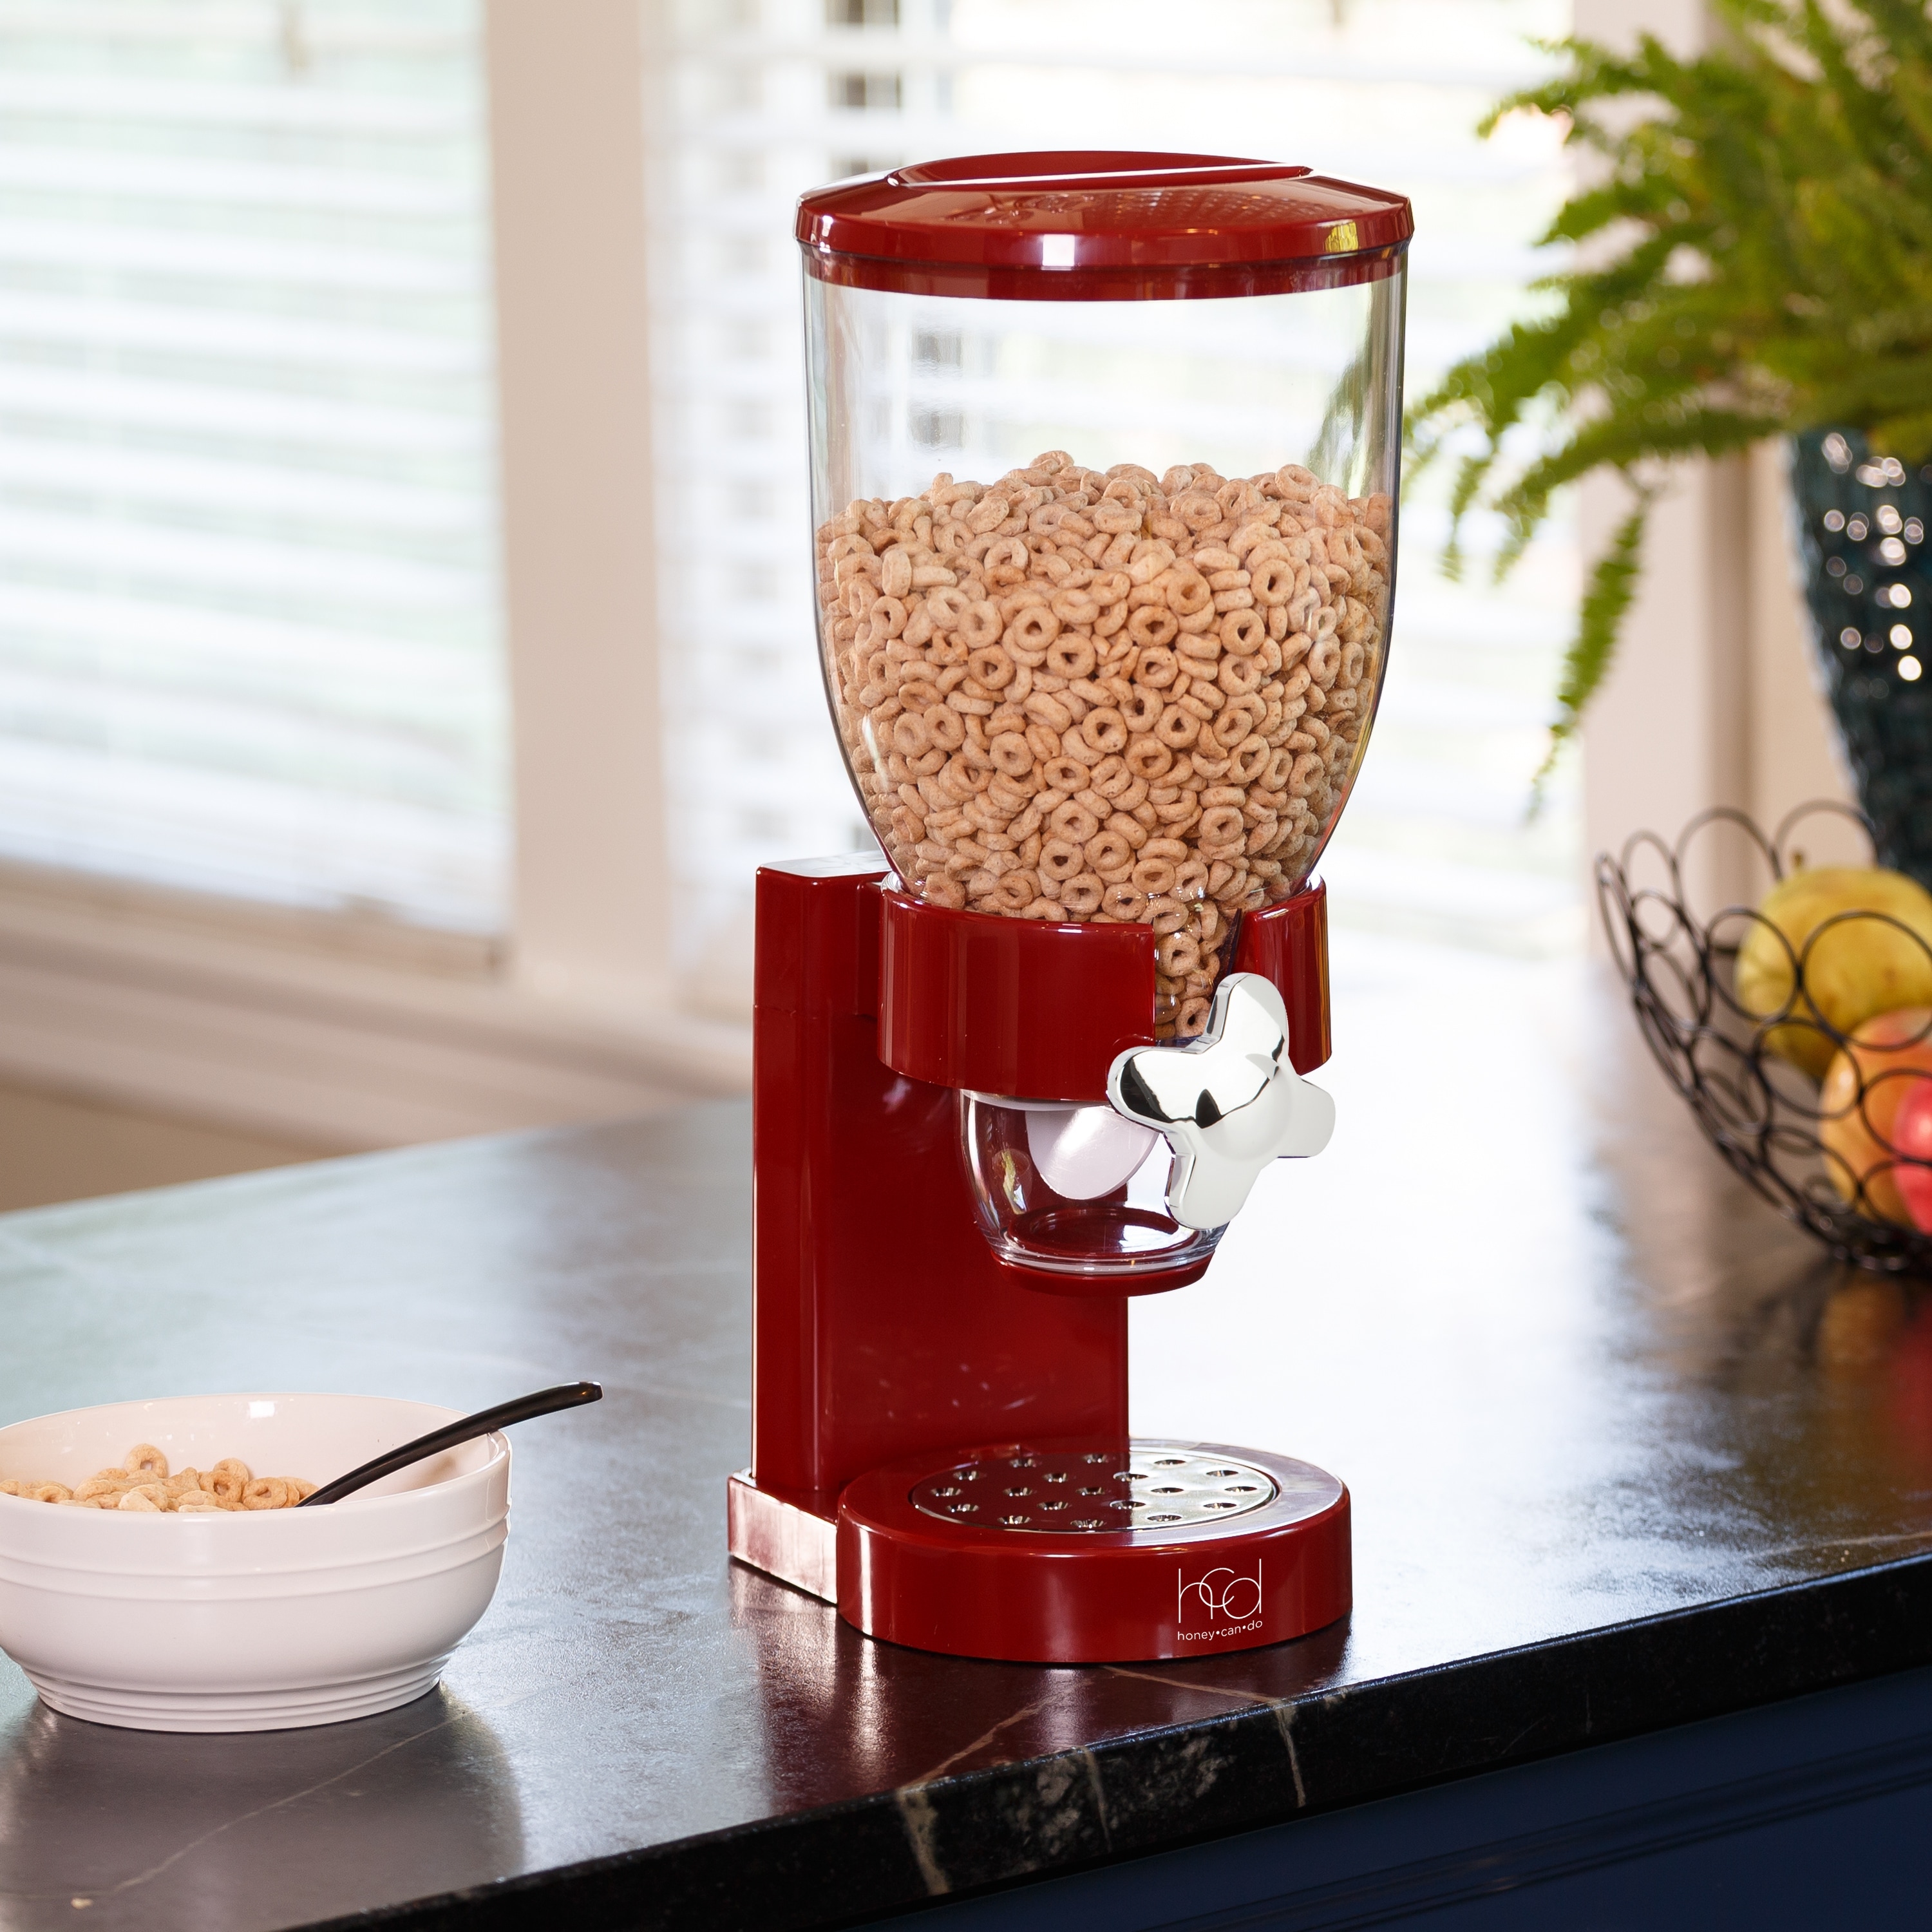 https://ak1.ostkcdn.com/images/products/is/images/direct/81fa8ee1ad84bddca3eed13c5cd97532460192fb/Red-Plastic-7.5-Oz.-Dry-Food-Dispenser.jpg